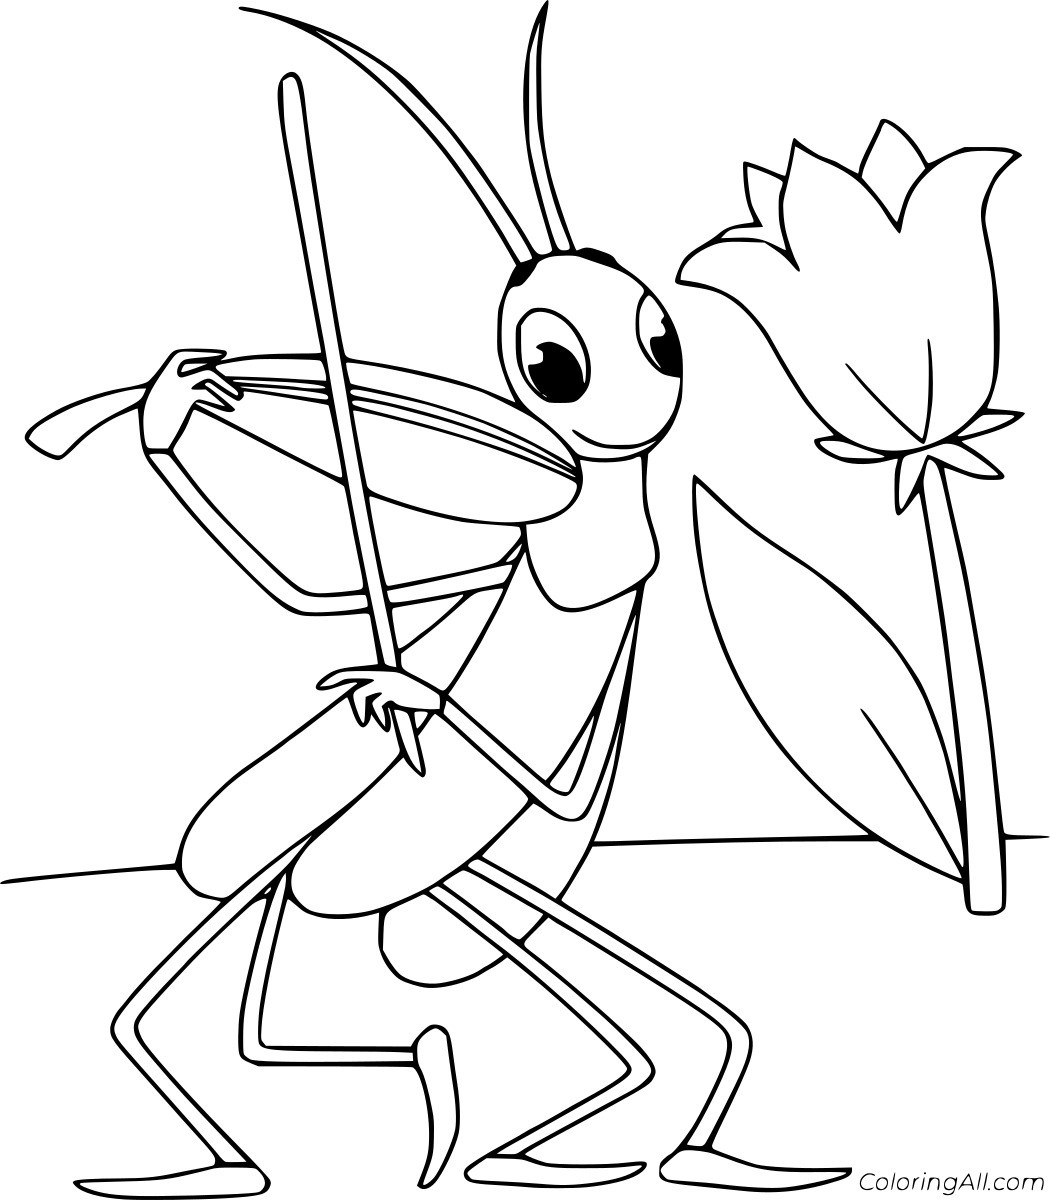 Grasshopper Playing Violin Coloring Page